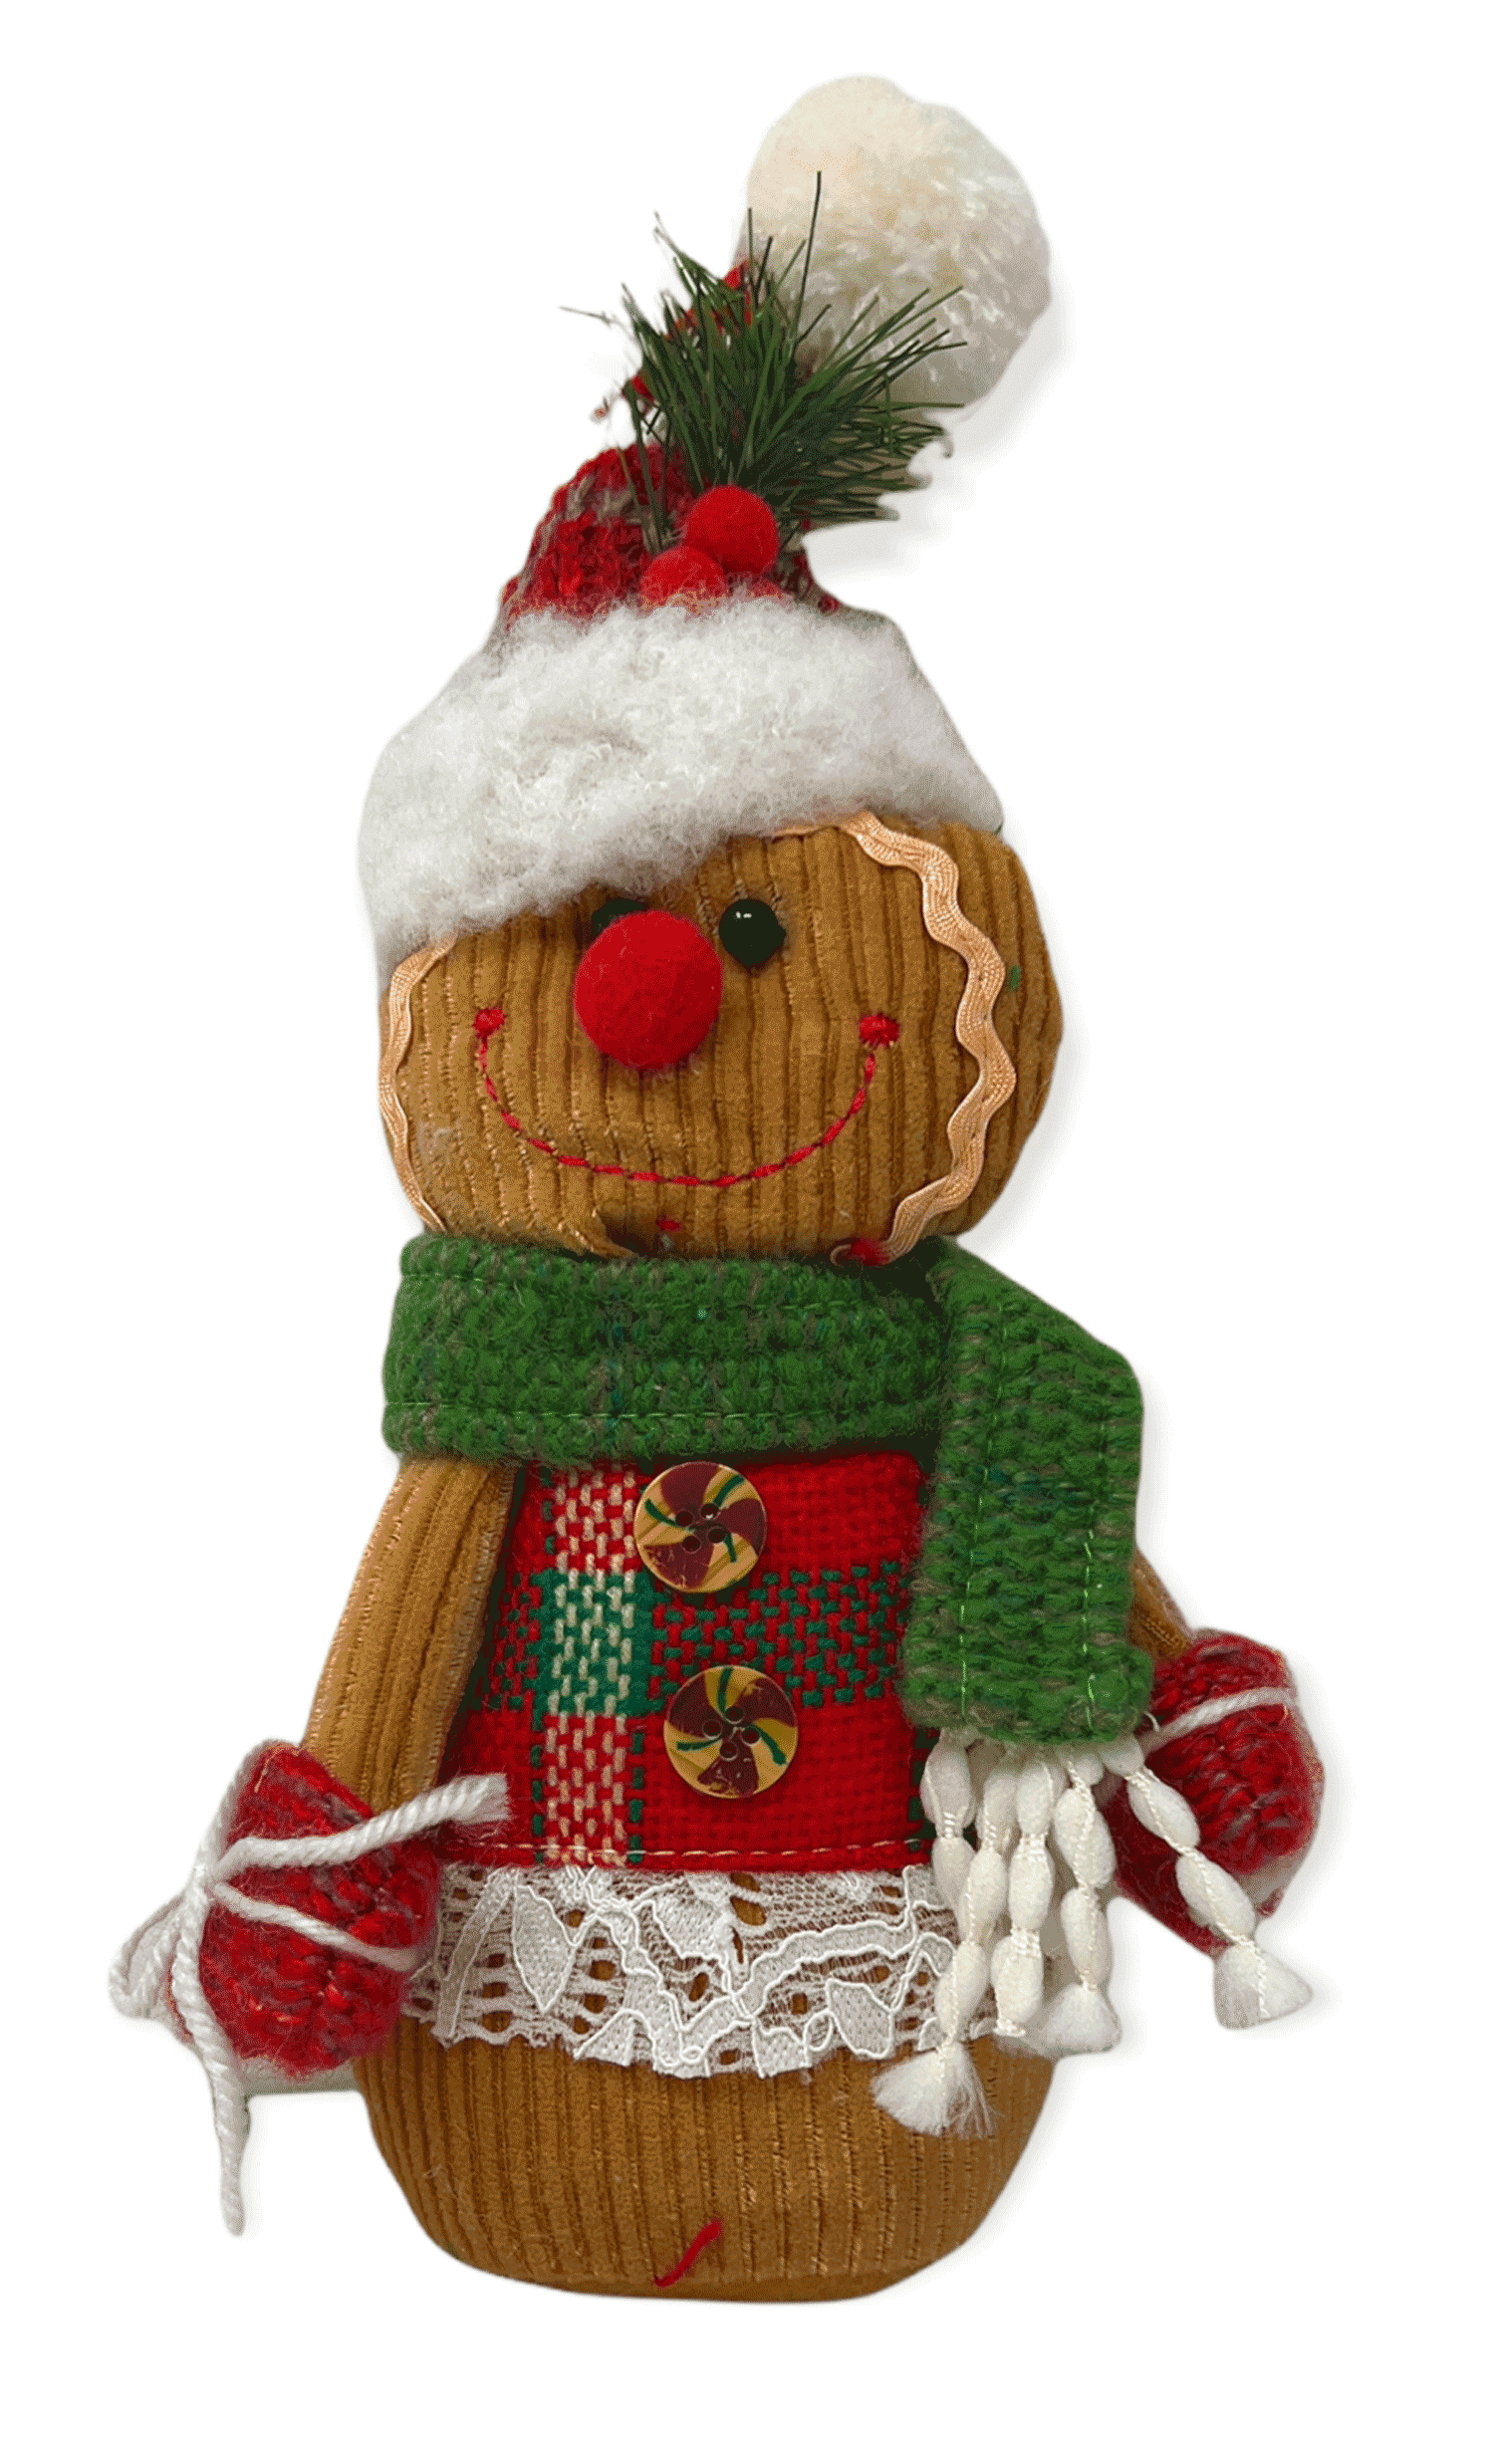 Details about   Christmas SNOWMAN 13" Sits Red Green Plush Stuffed Shelf Sitter 2007 Decorations 